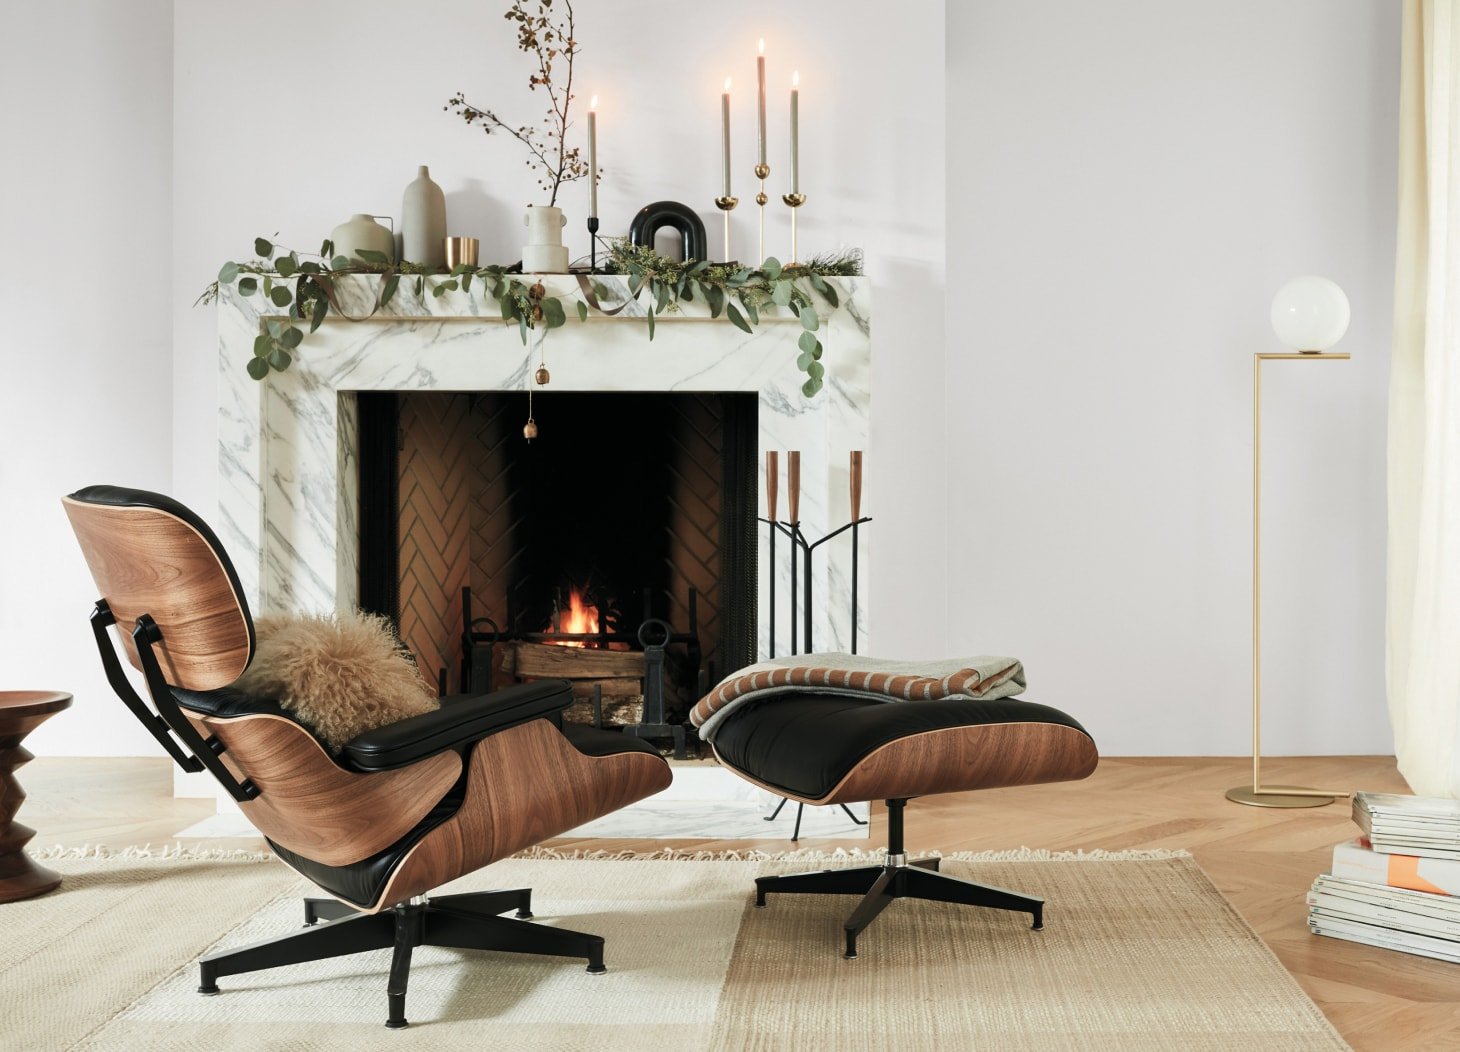 Eames® Lounge Chair and Eames Office